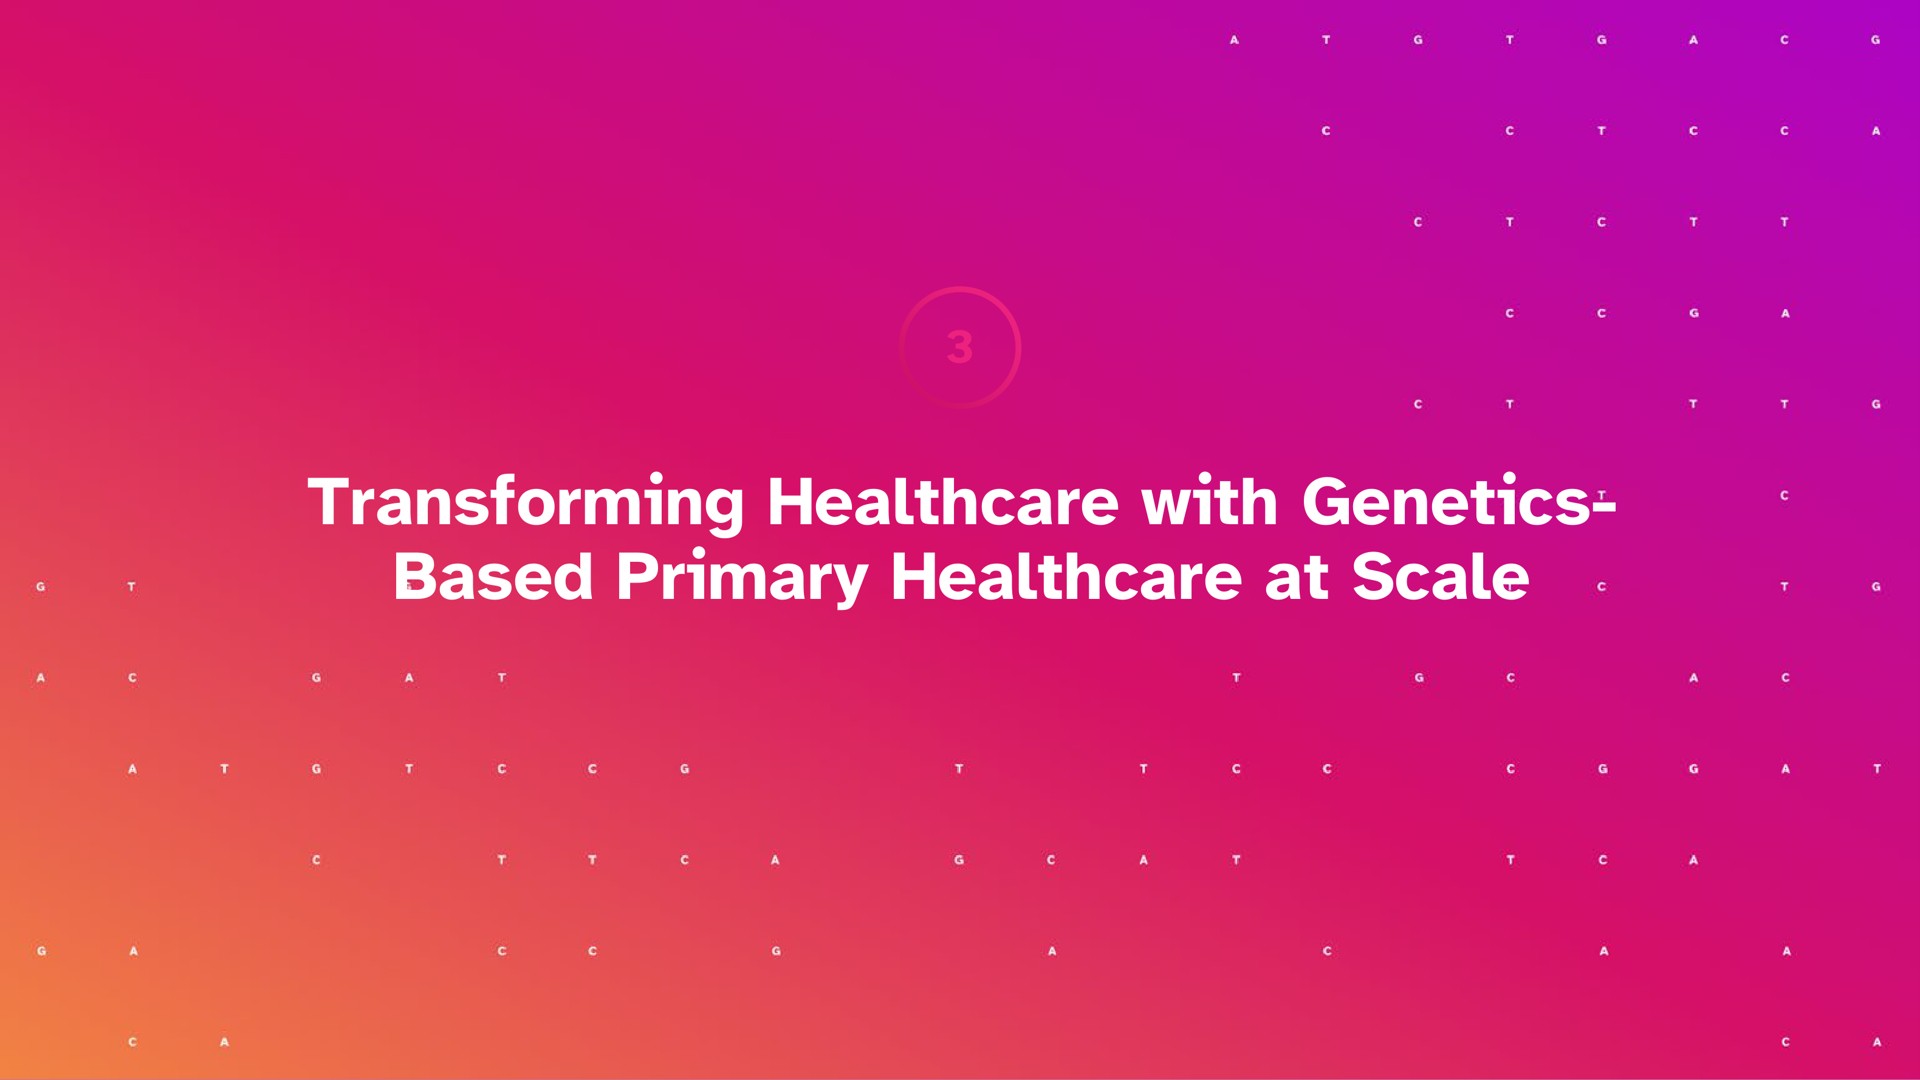 transforming with genetics based primary at scale | 23andMe